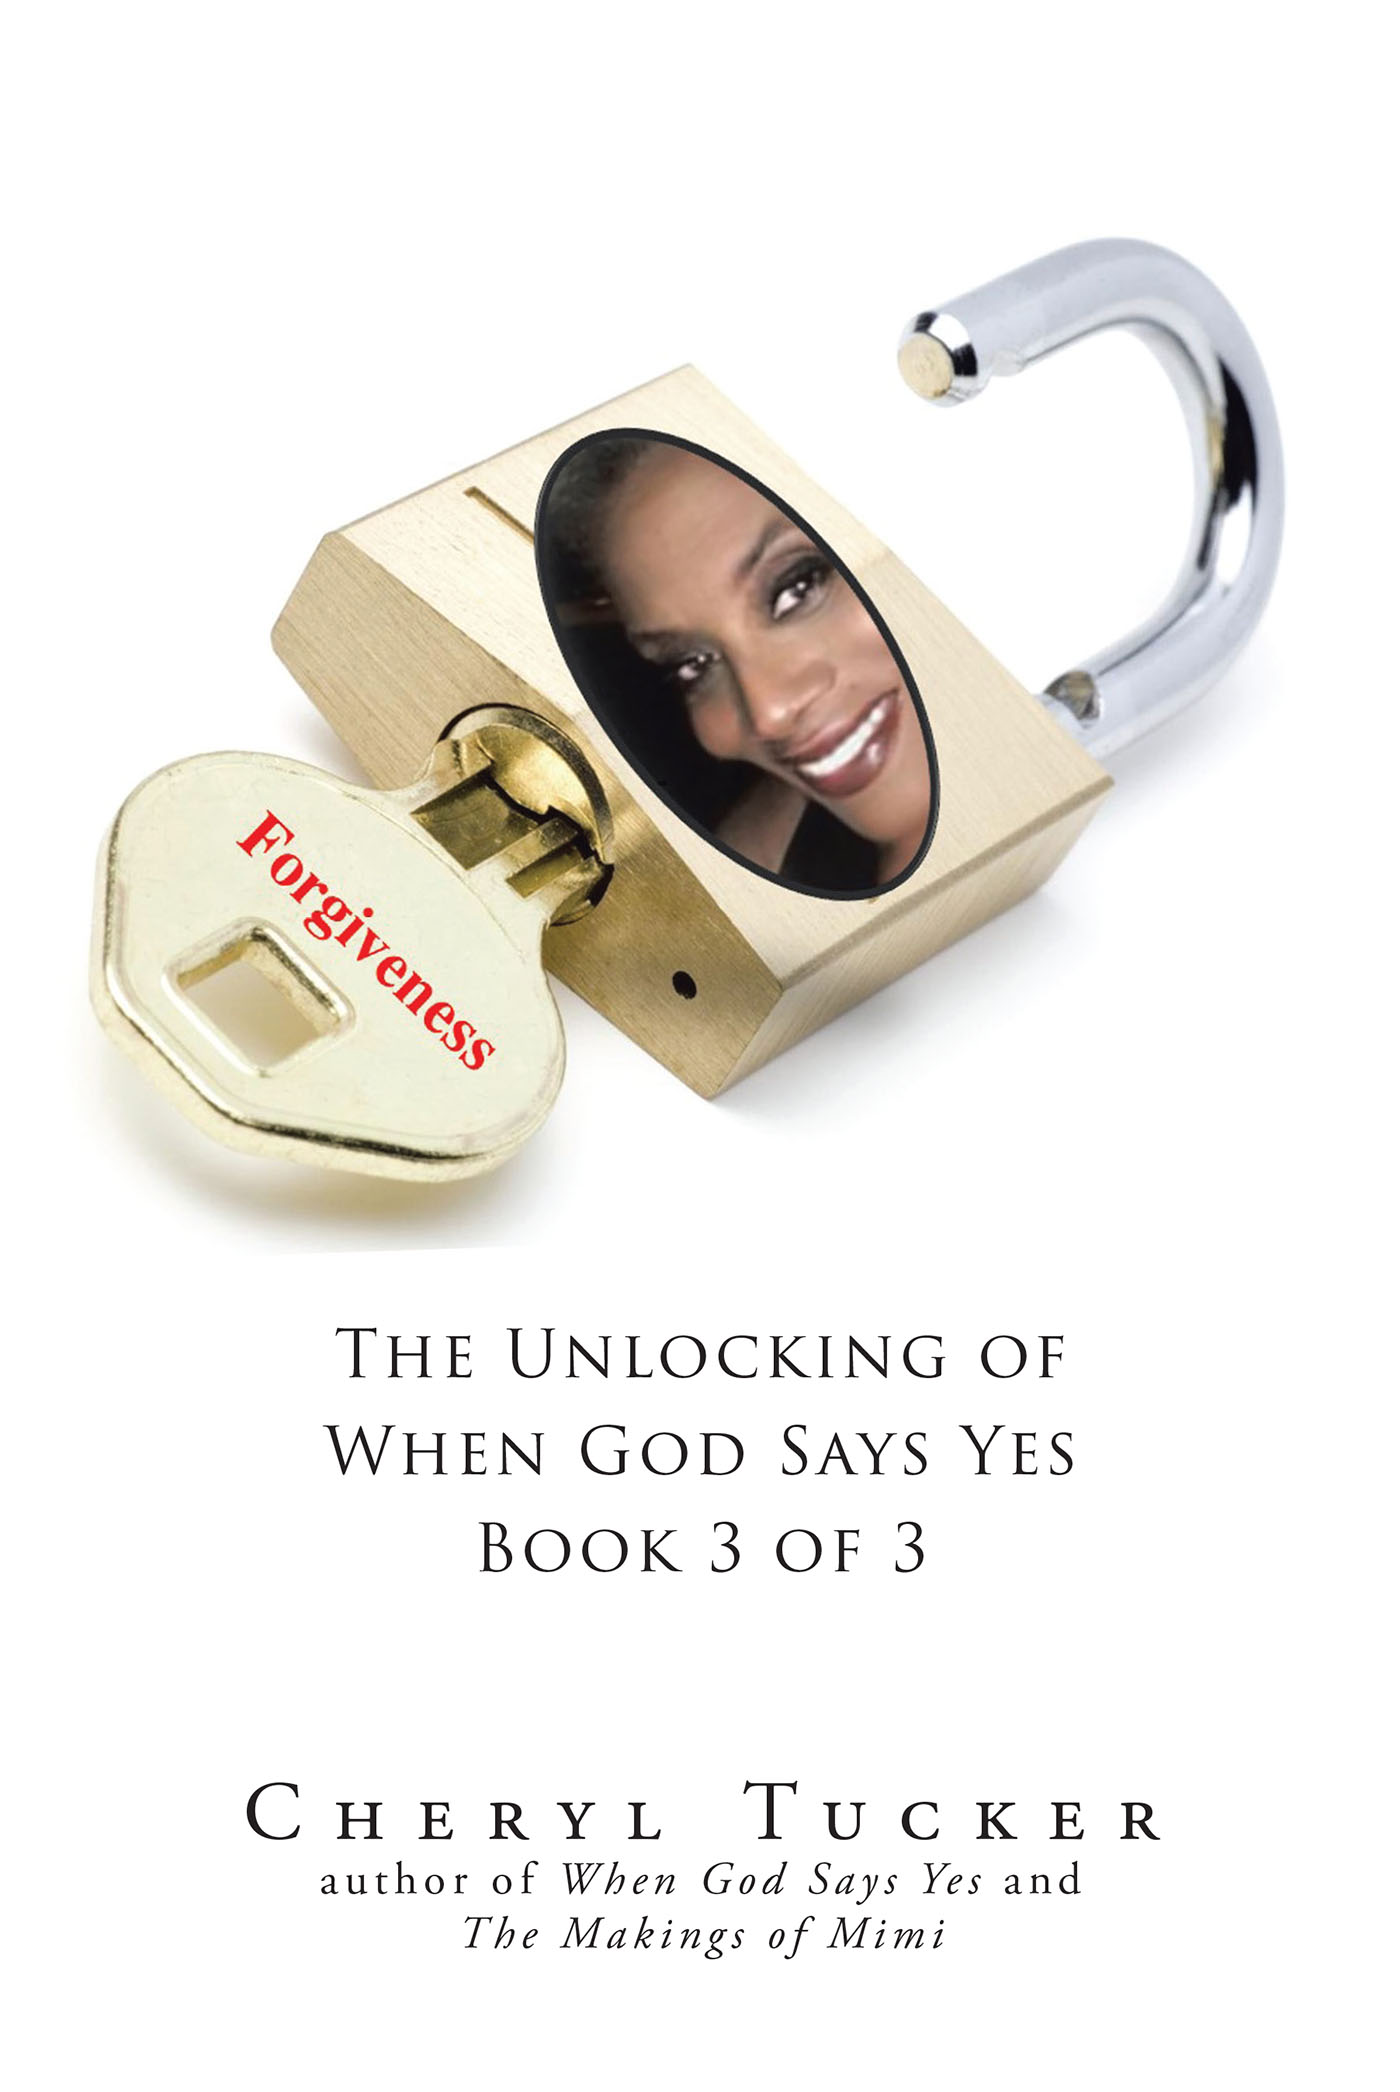 Cheryl Tucker’s Newly Released “Forgiveness: The Unlocking of When God Says Yes Book 3 of 3” is a Powerful Reminder of the Power of Releasing Past Hurts